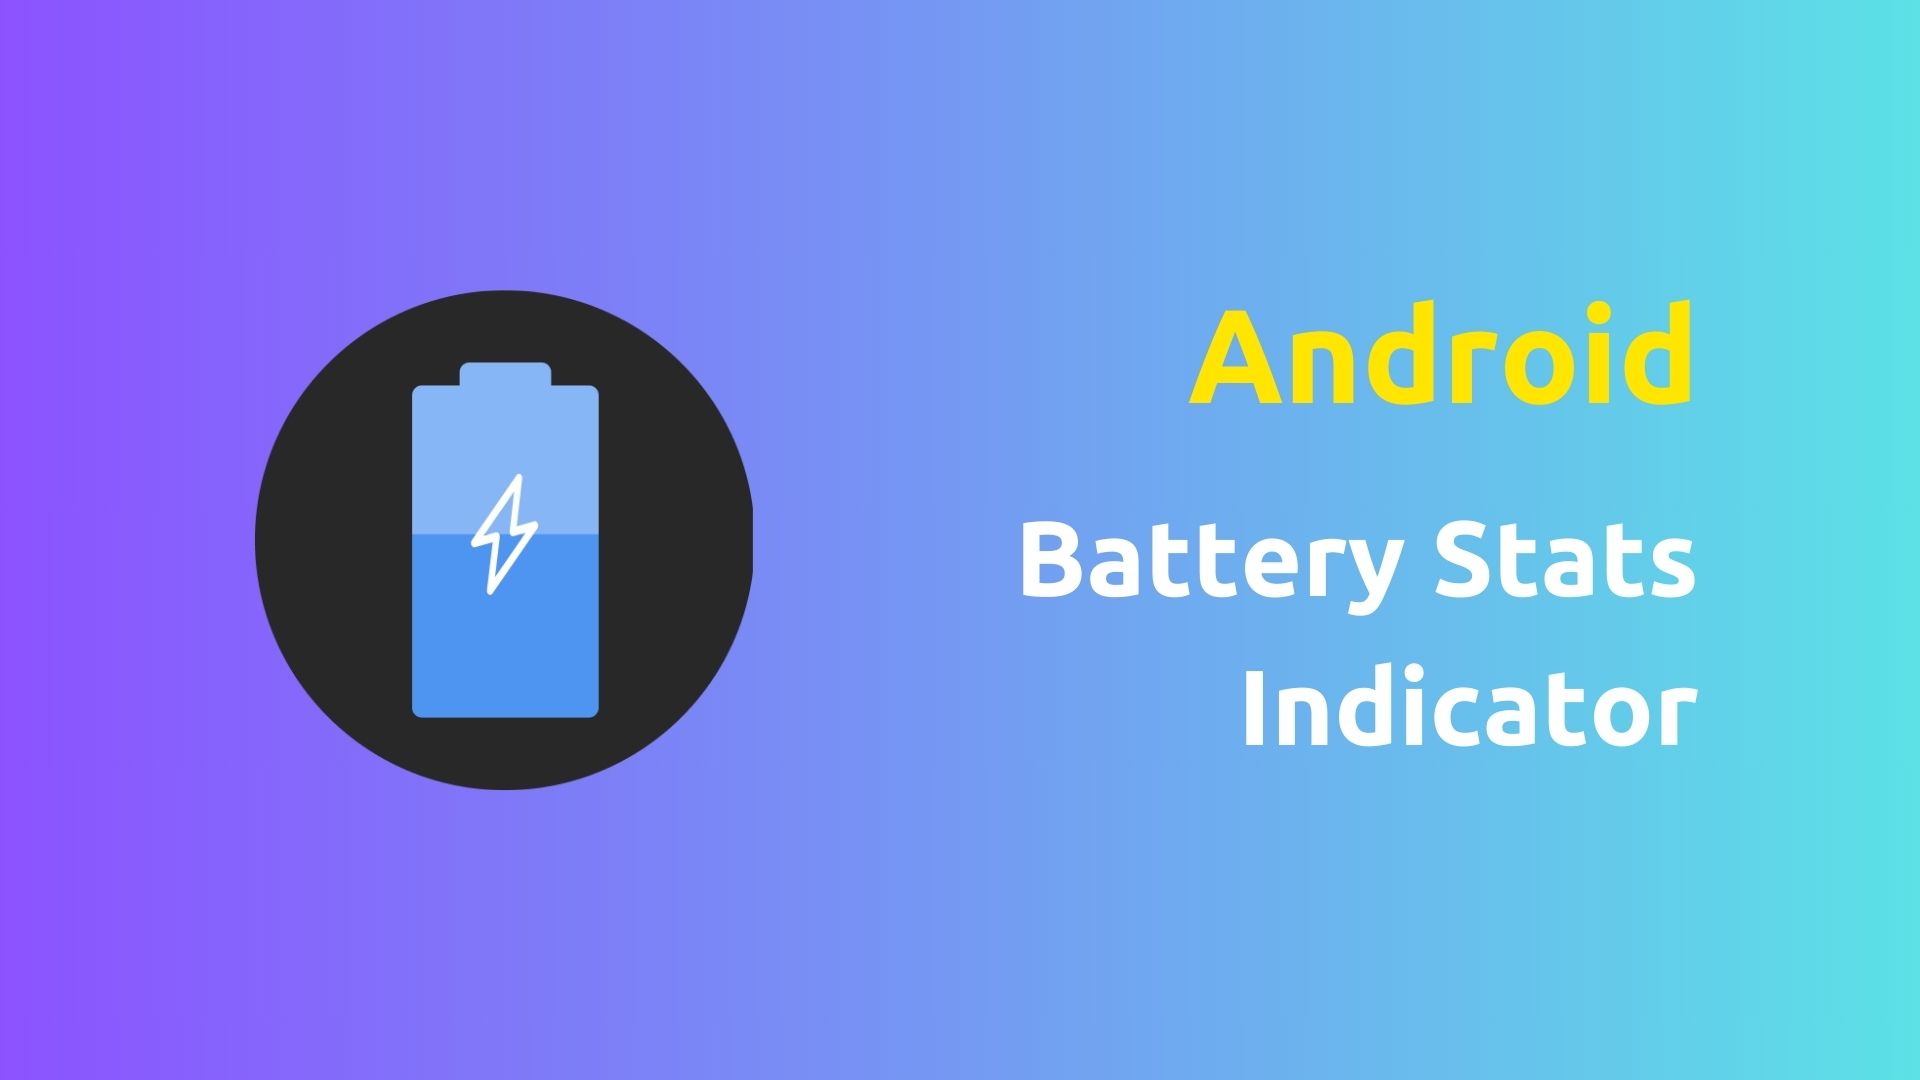 Android Battery View